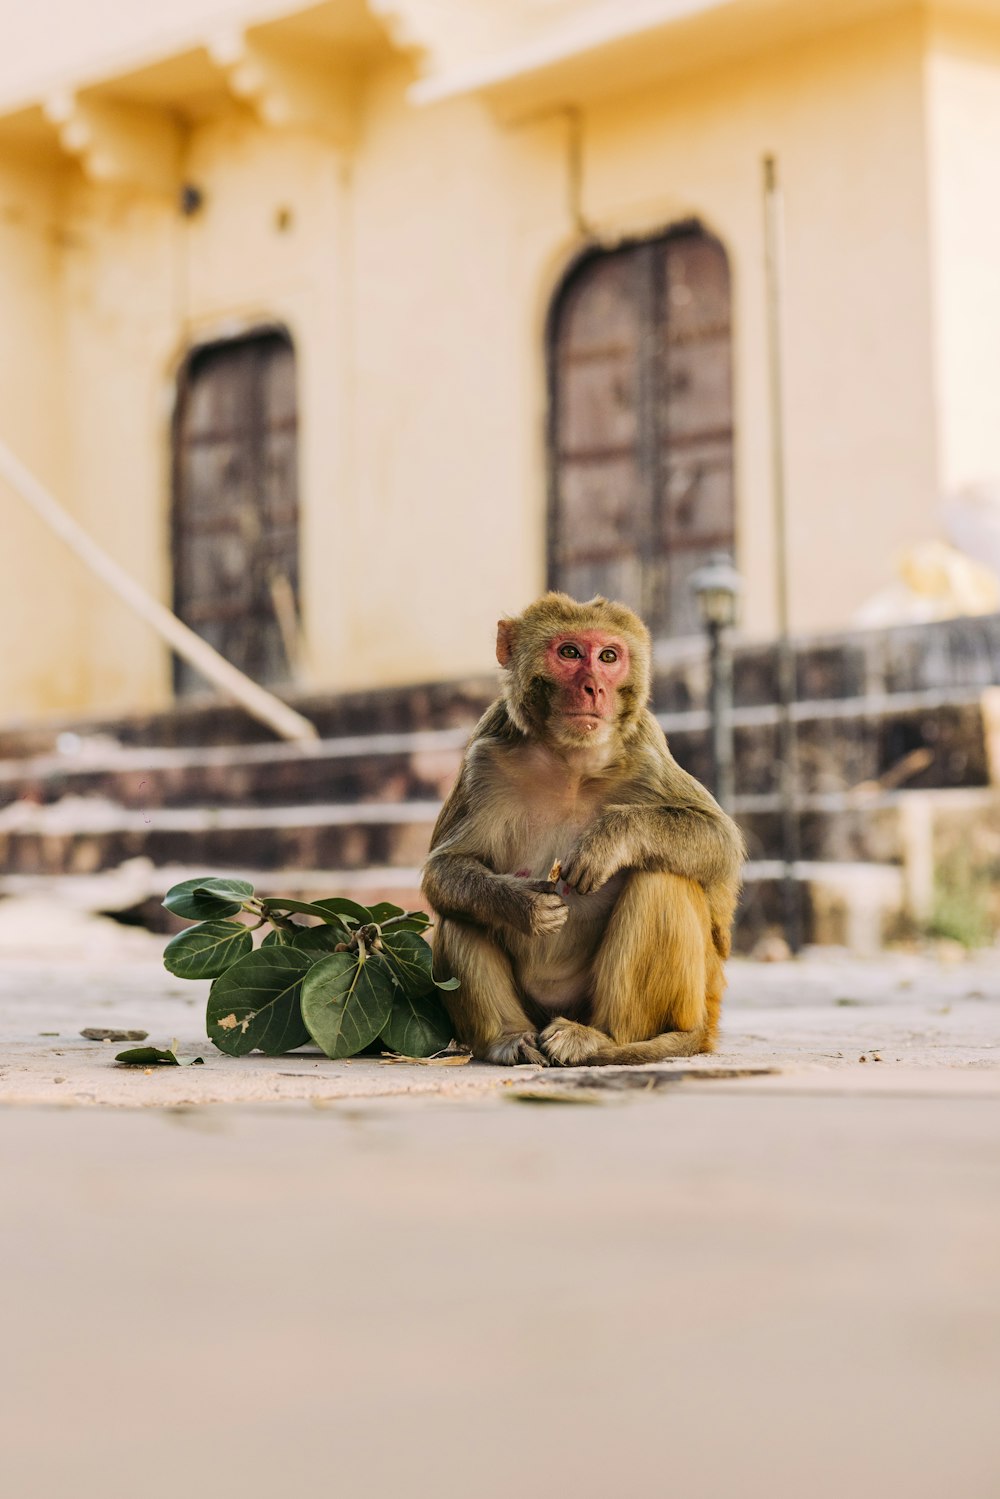 a small monkey sitting on the ground next to a plant